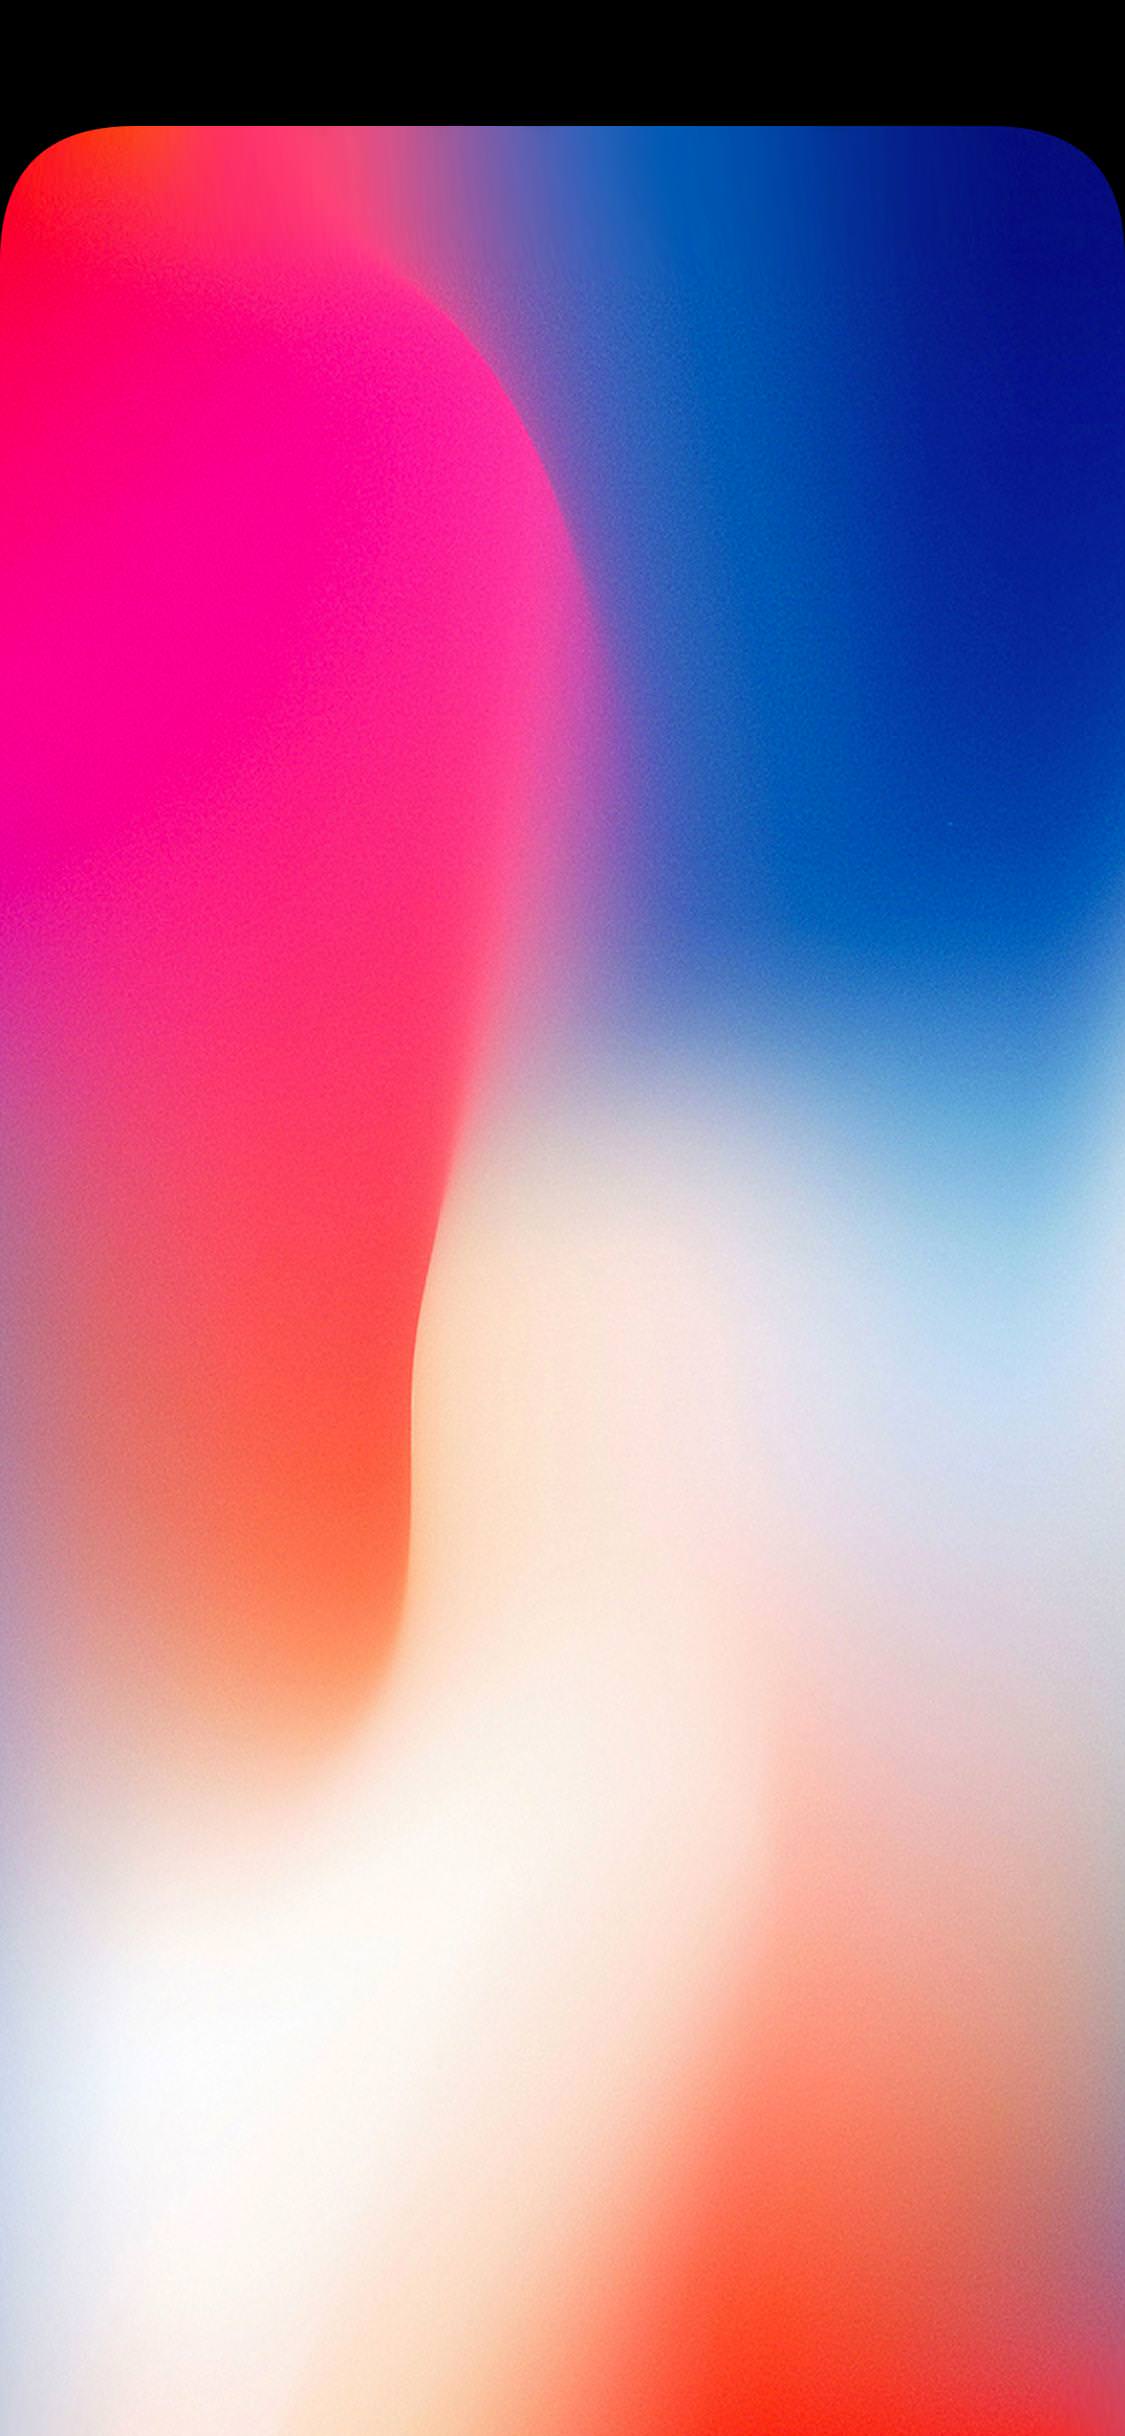 iPhone X Notch Wallpapers Wallpaper Cave